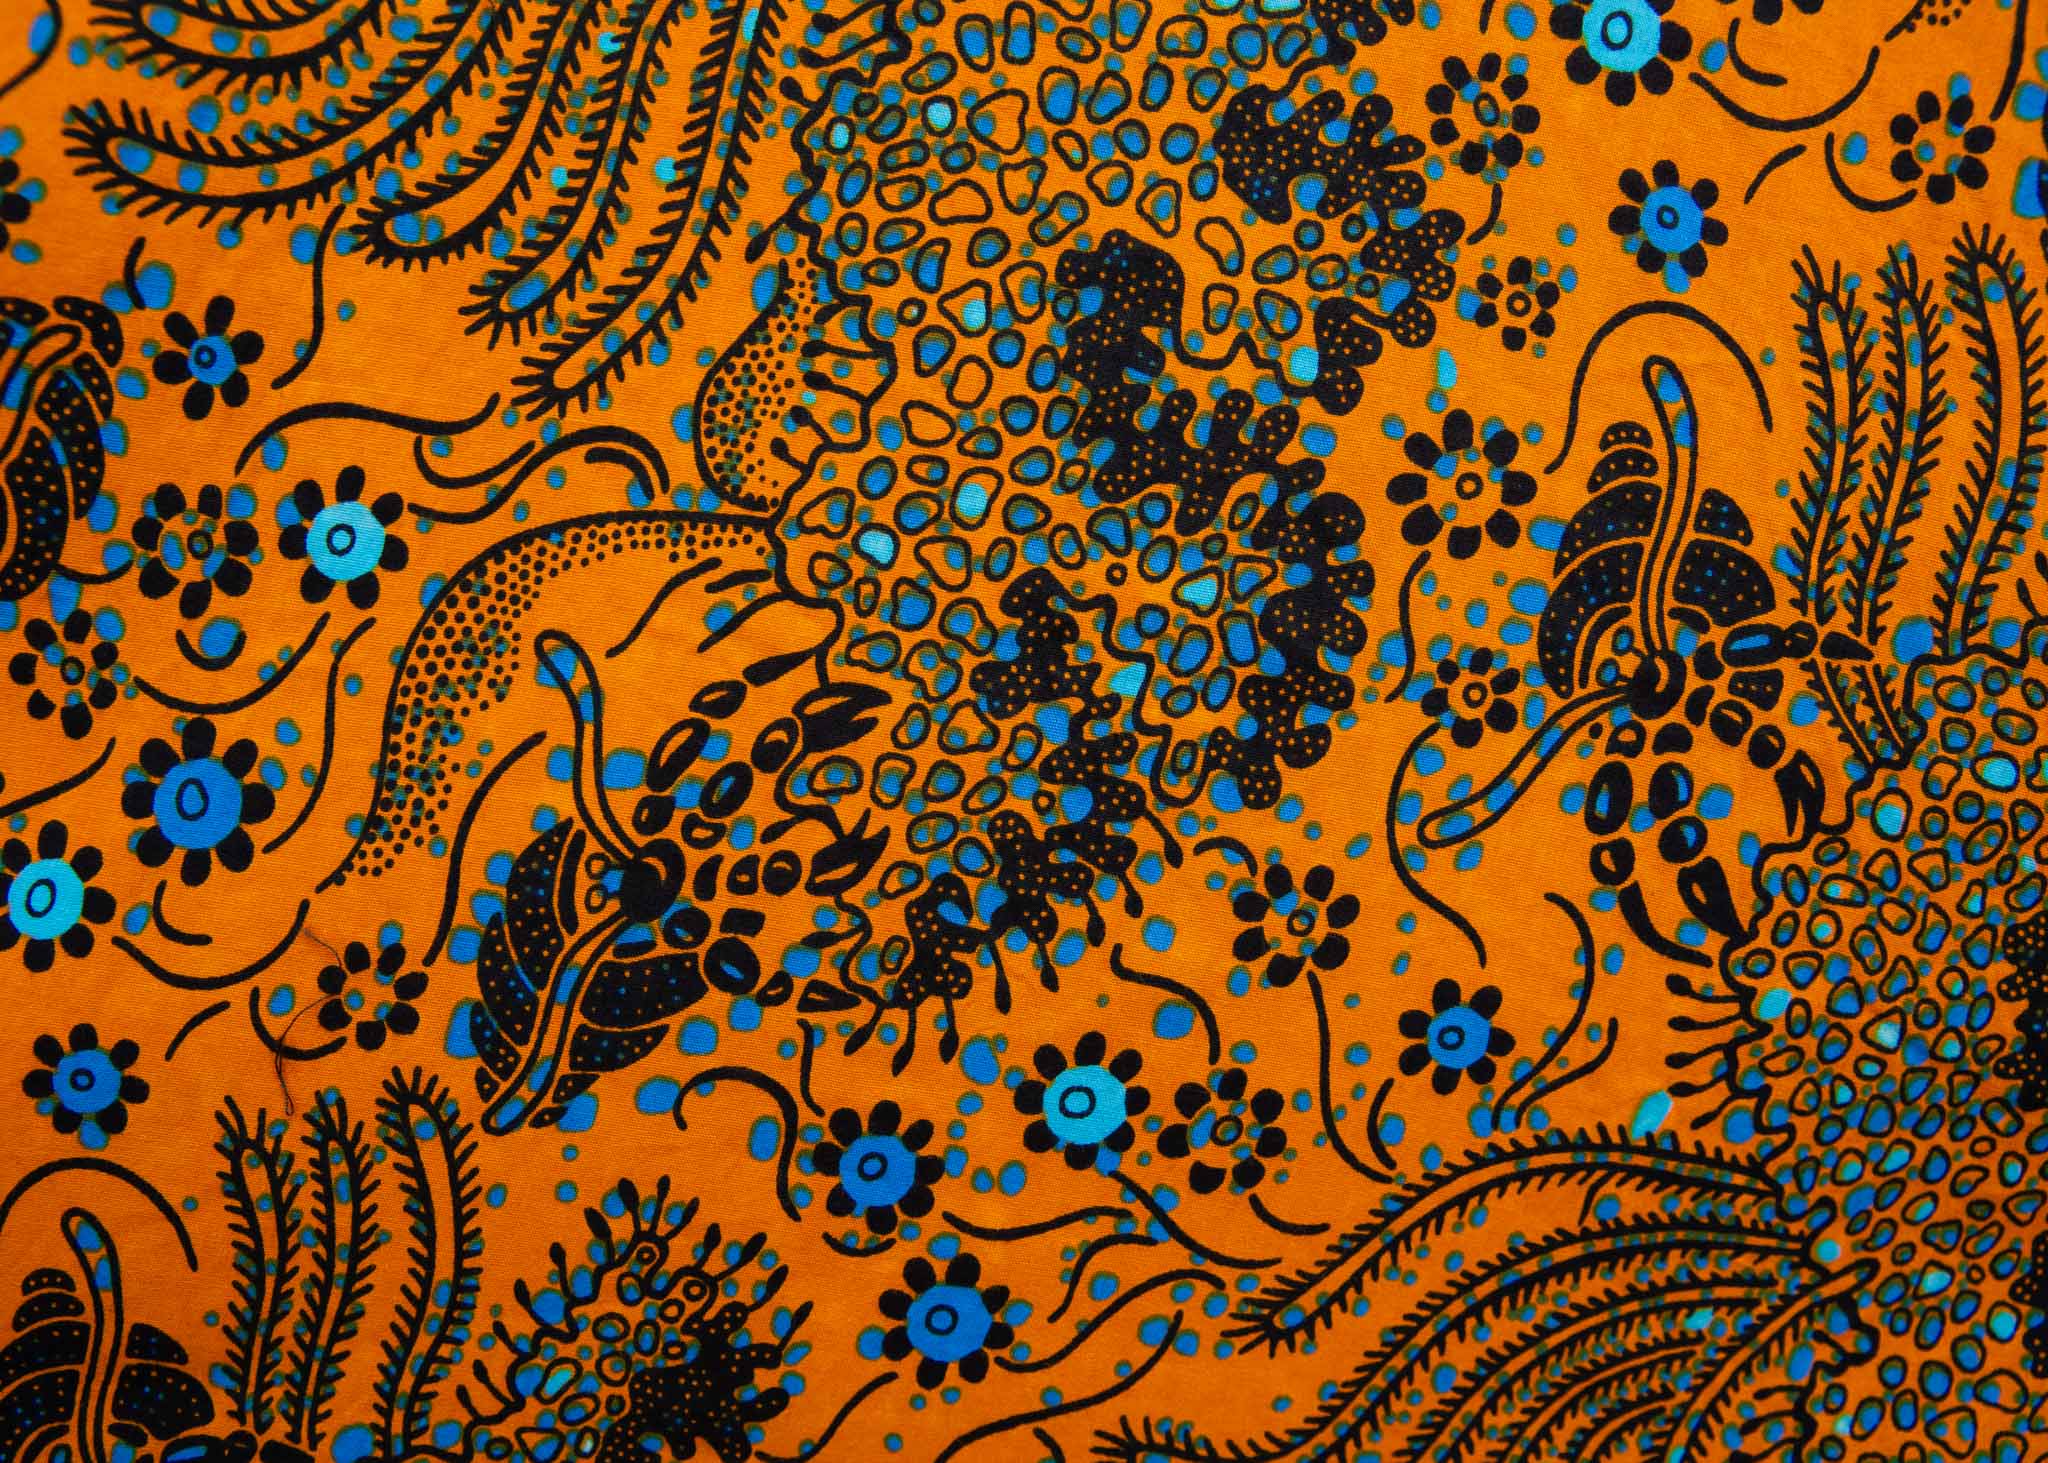 Close up display of caramel dress with blue and black small floral print, fabric.